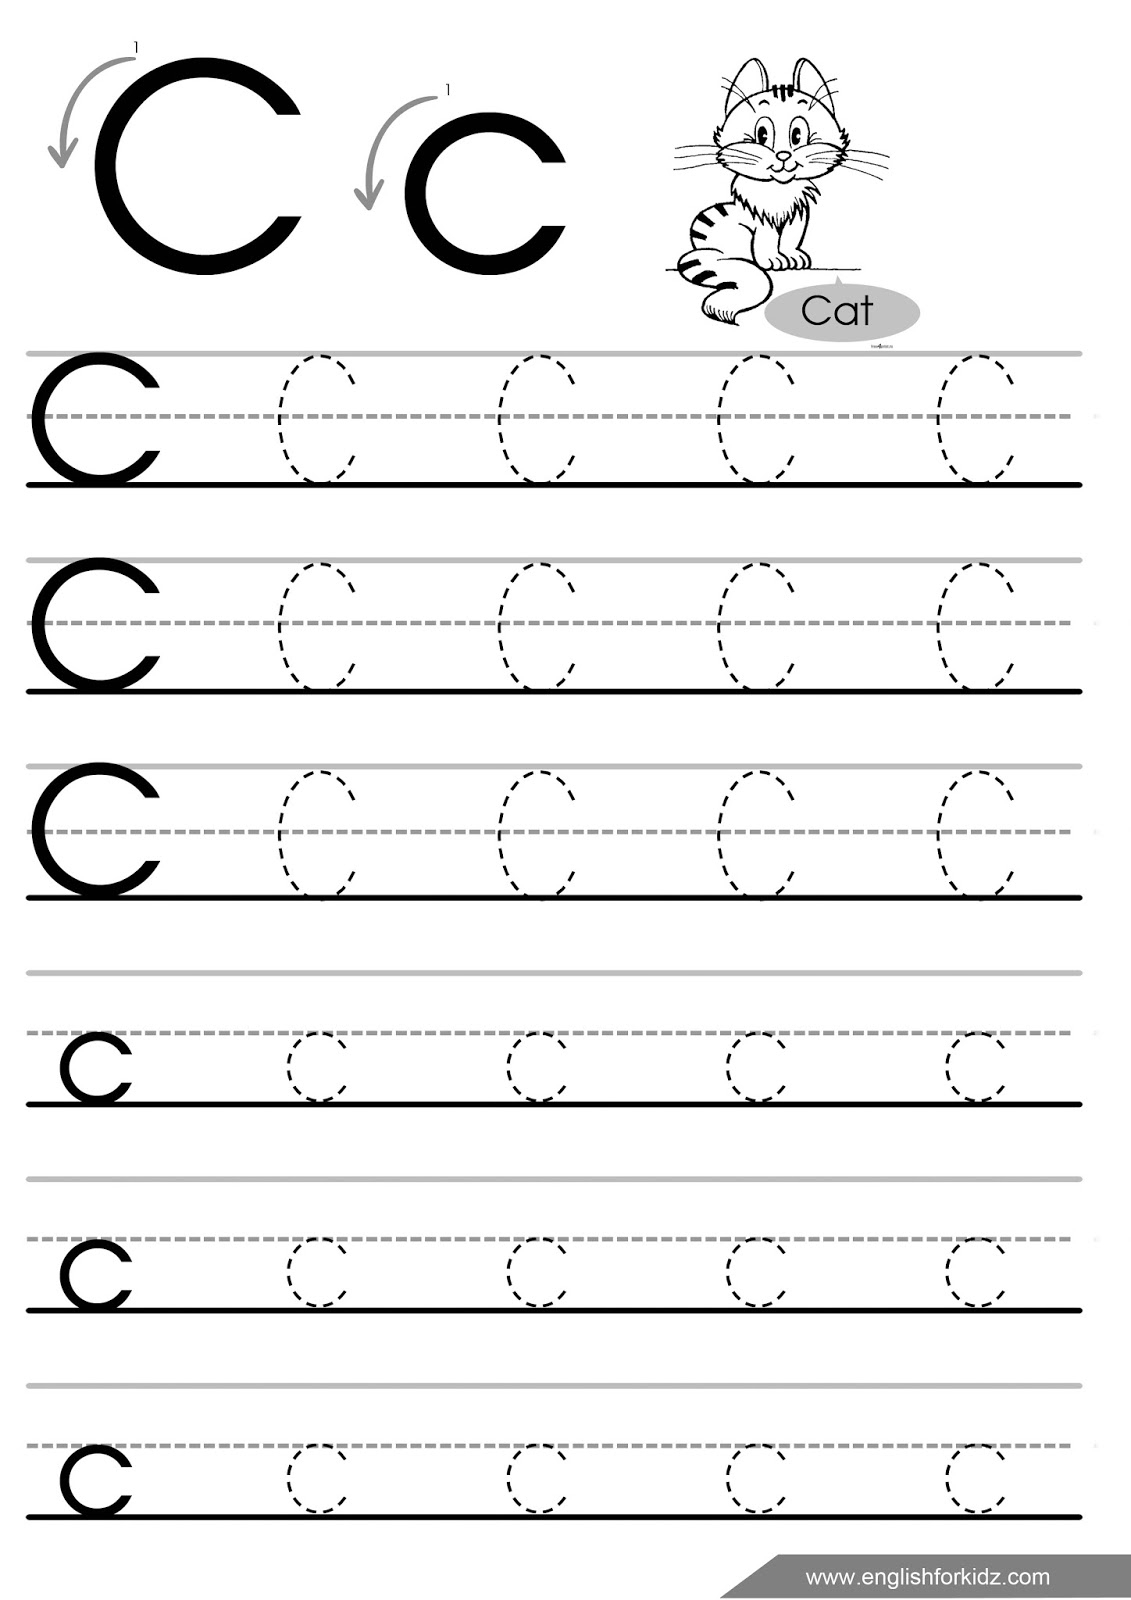 Letter Tracing Worksheets (Letters A - J) regarding Letter C Tracing Page